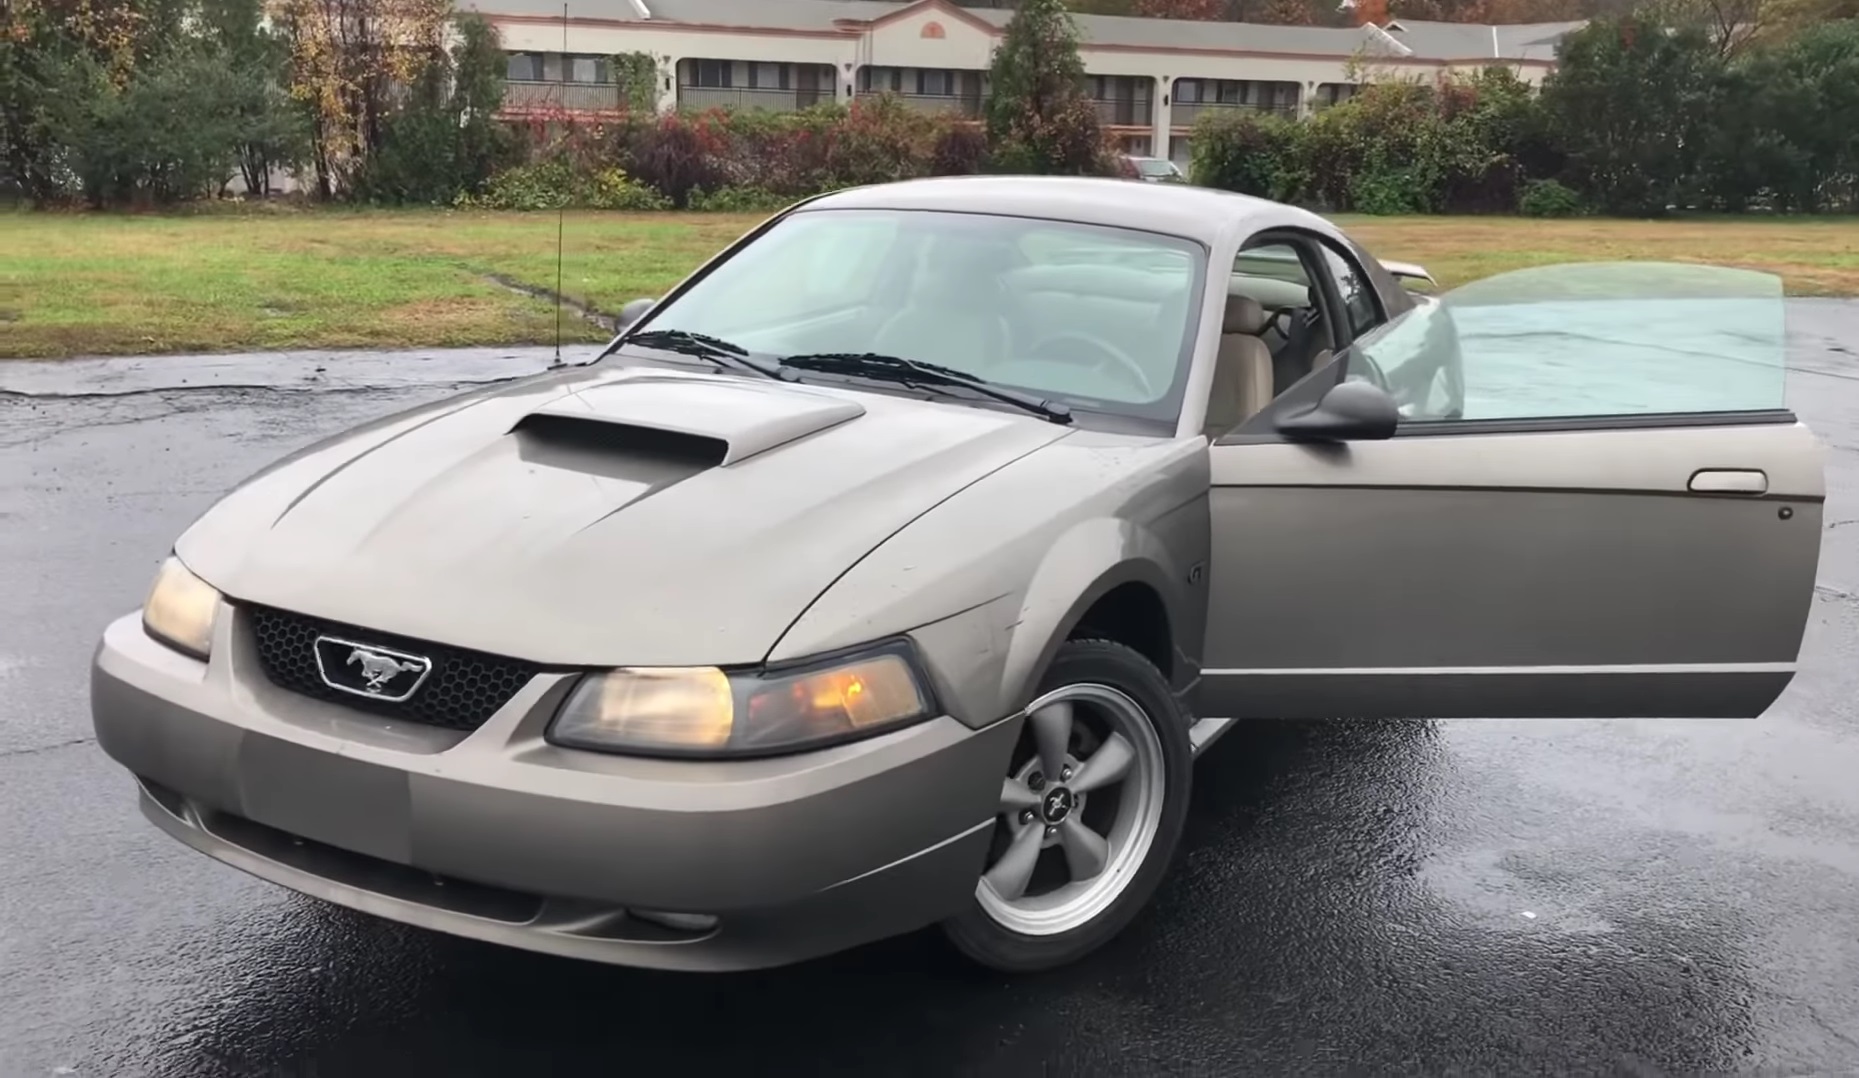 Video: 2002 Ford Mustang GT Overview